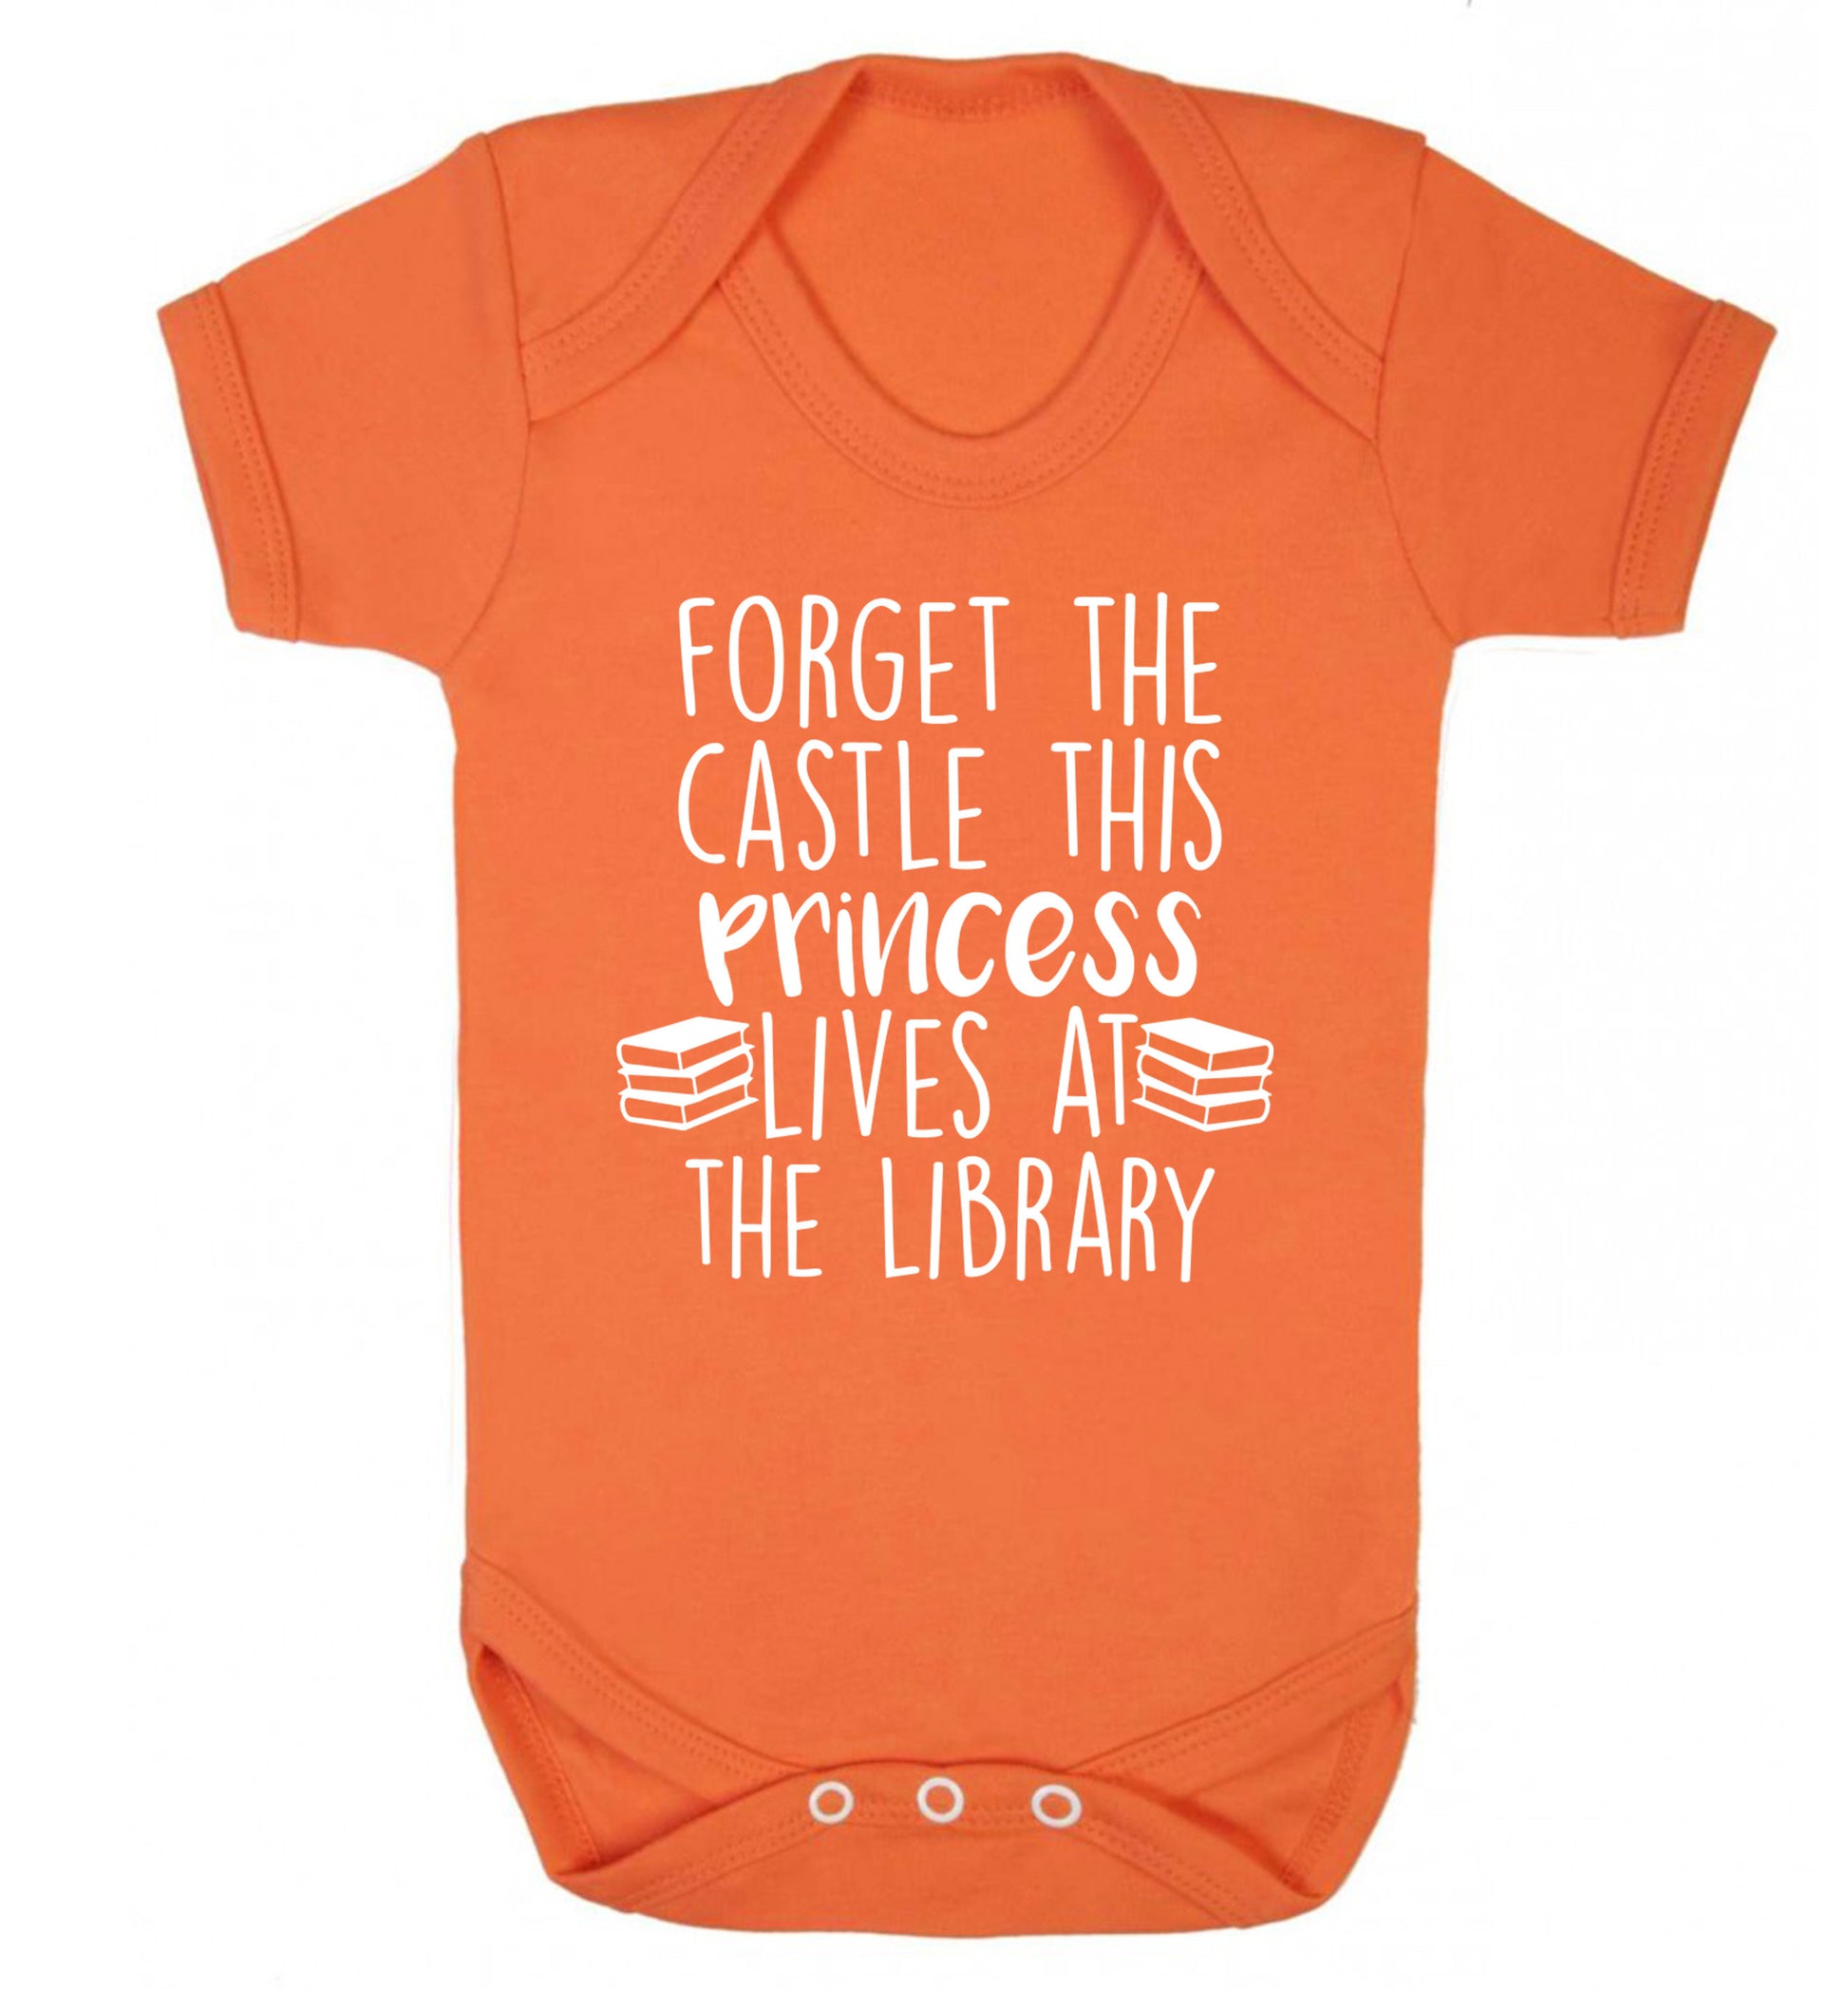 Forget the castle this princess lives at the library Baby Vest orange 18-24 months